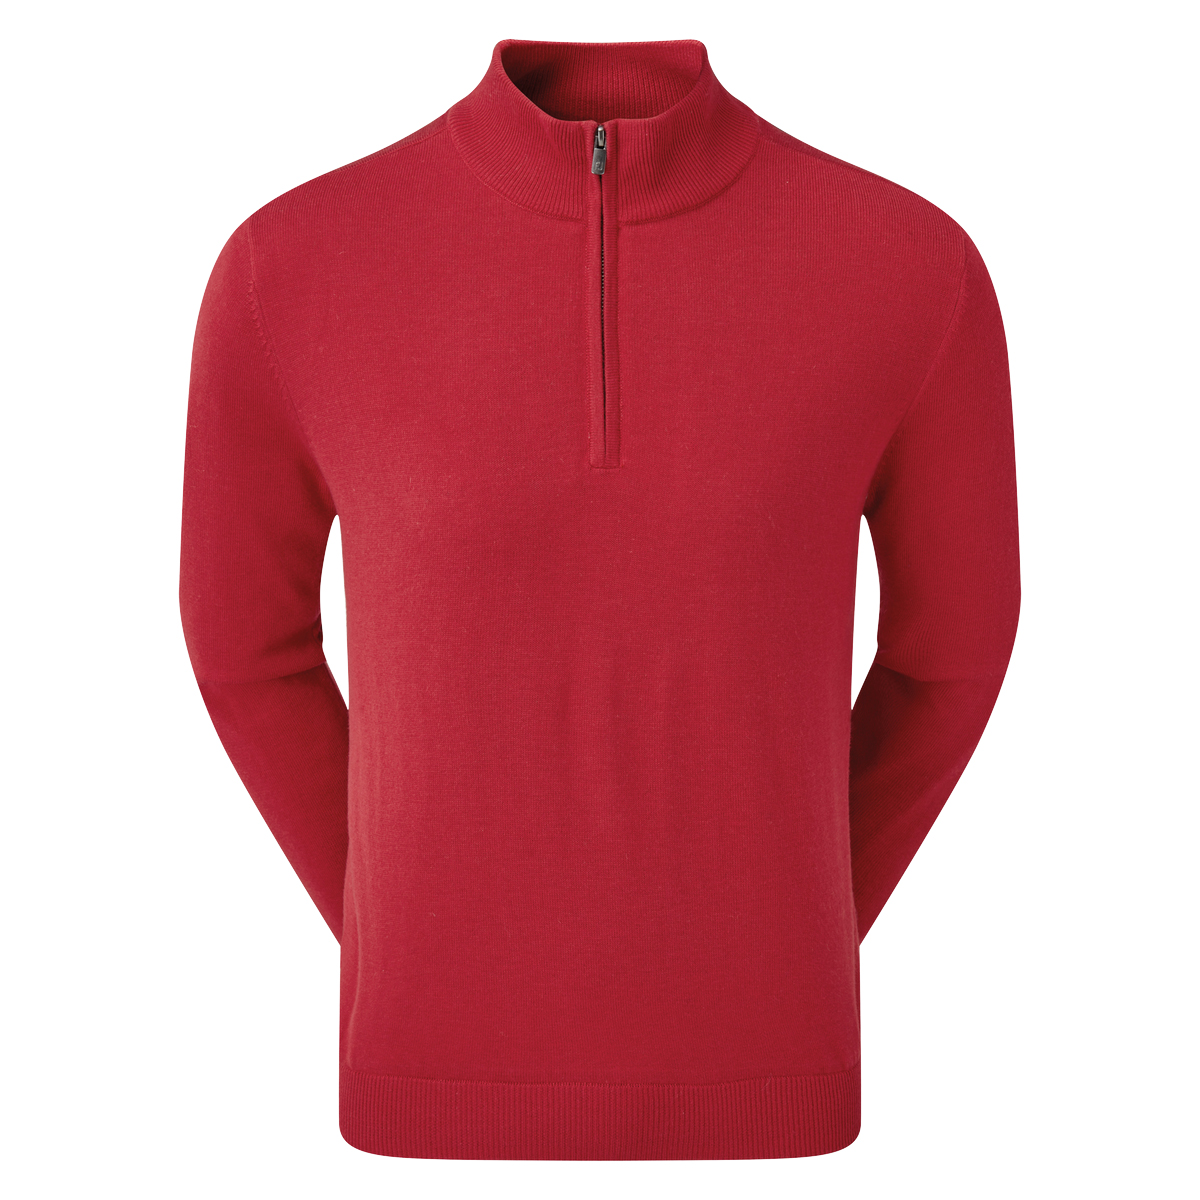 FootJoy Mens Wool Blend 1/2 Zip Lined Golf Sweater Pullover  - Red